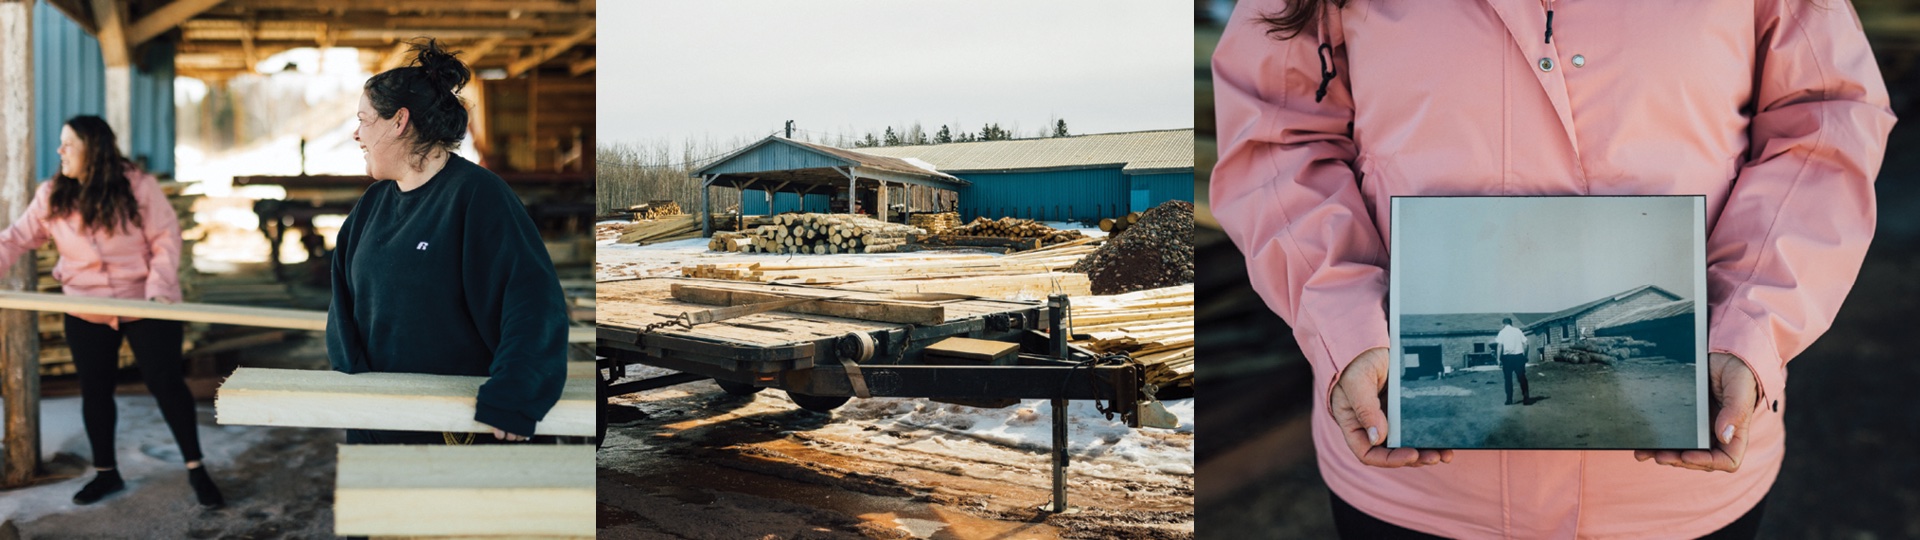 “Arsenault Family Lumber” was started by the Arsenault sisters in May 2021. The family business, “Arsenault Sawmill Ltd.,” got out of the sawmill side of the lumber industry in 2007.